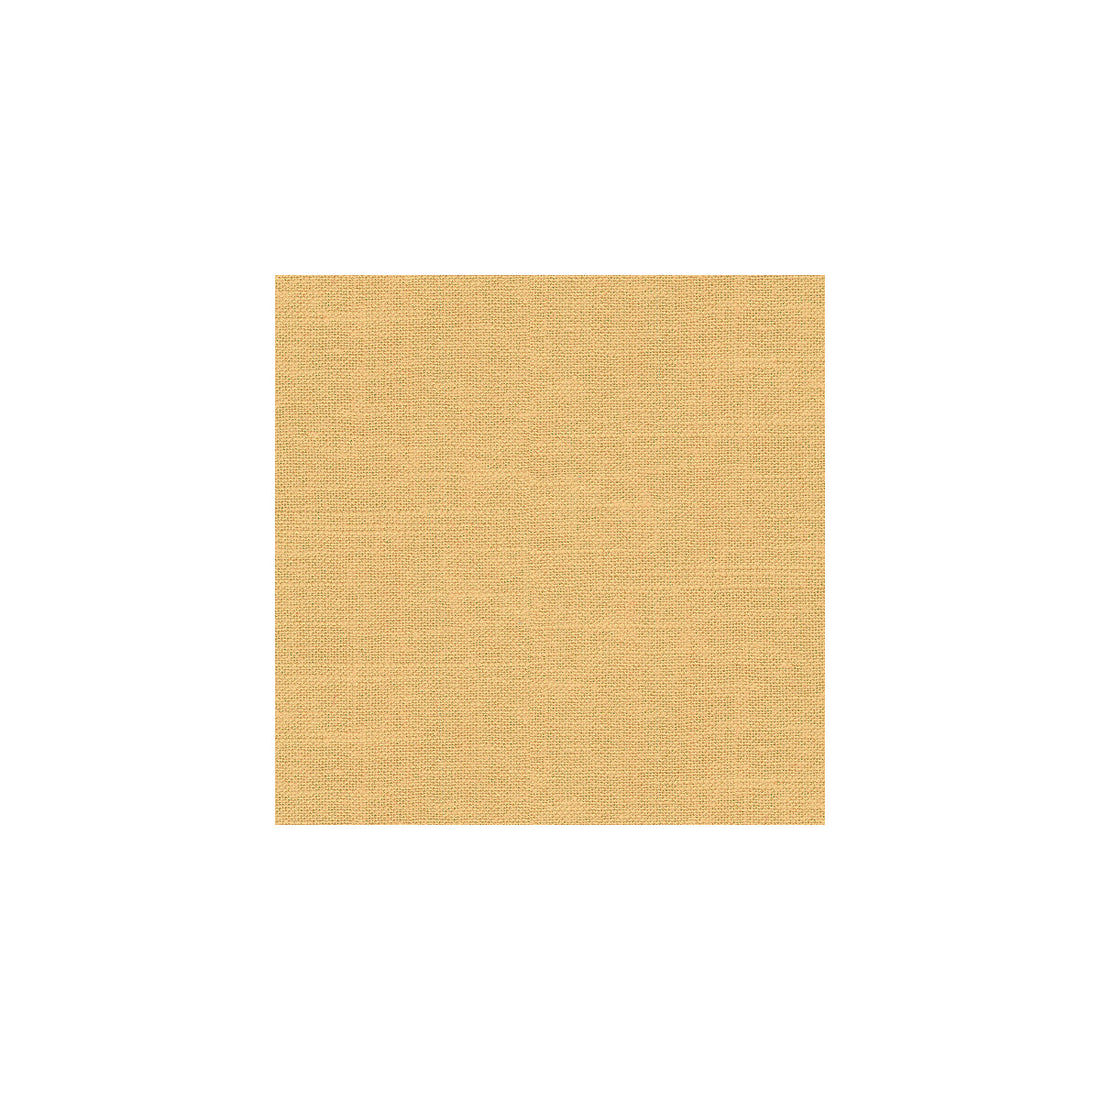 Barnegat fabric in camel color - pattern 24573.16.0 - by Kravet Basics in the Perfect Plains collection